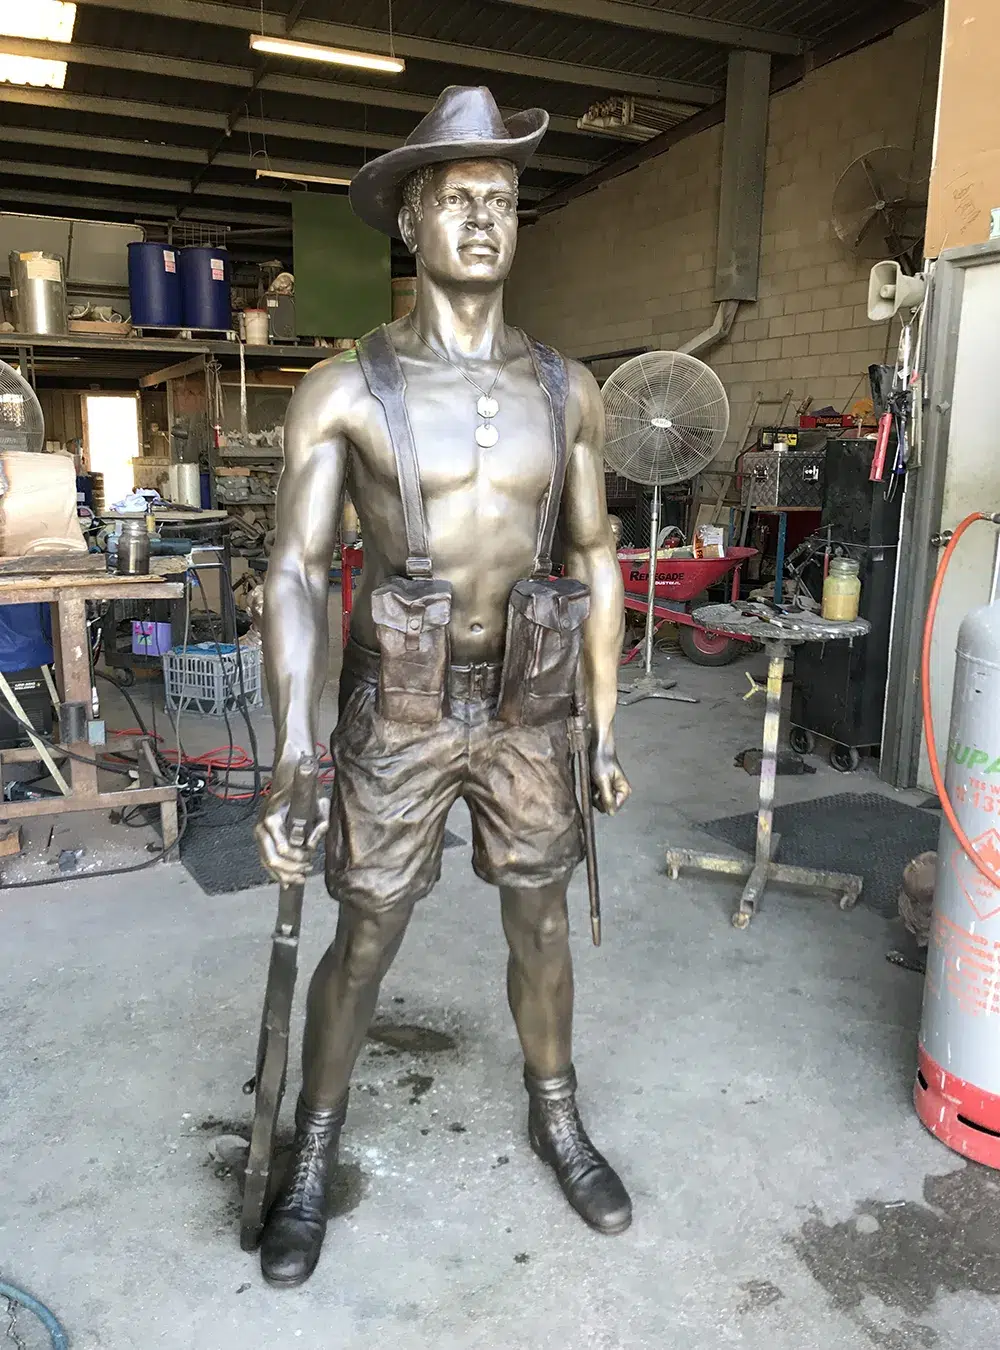 Completed bronze statue of a soldier, crafted by Sculpt Studios, showcased in a workshop with various tools and equipment in the background.